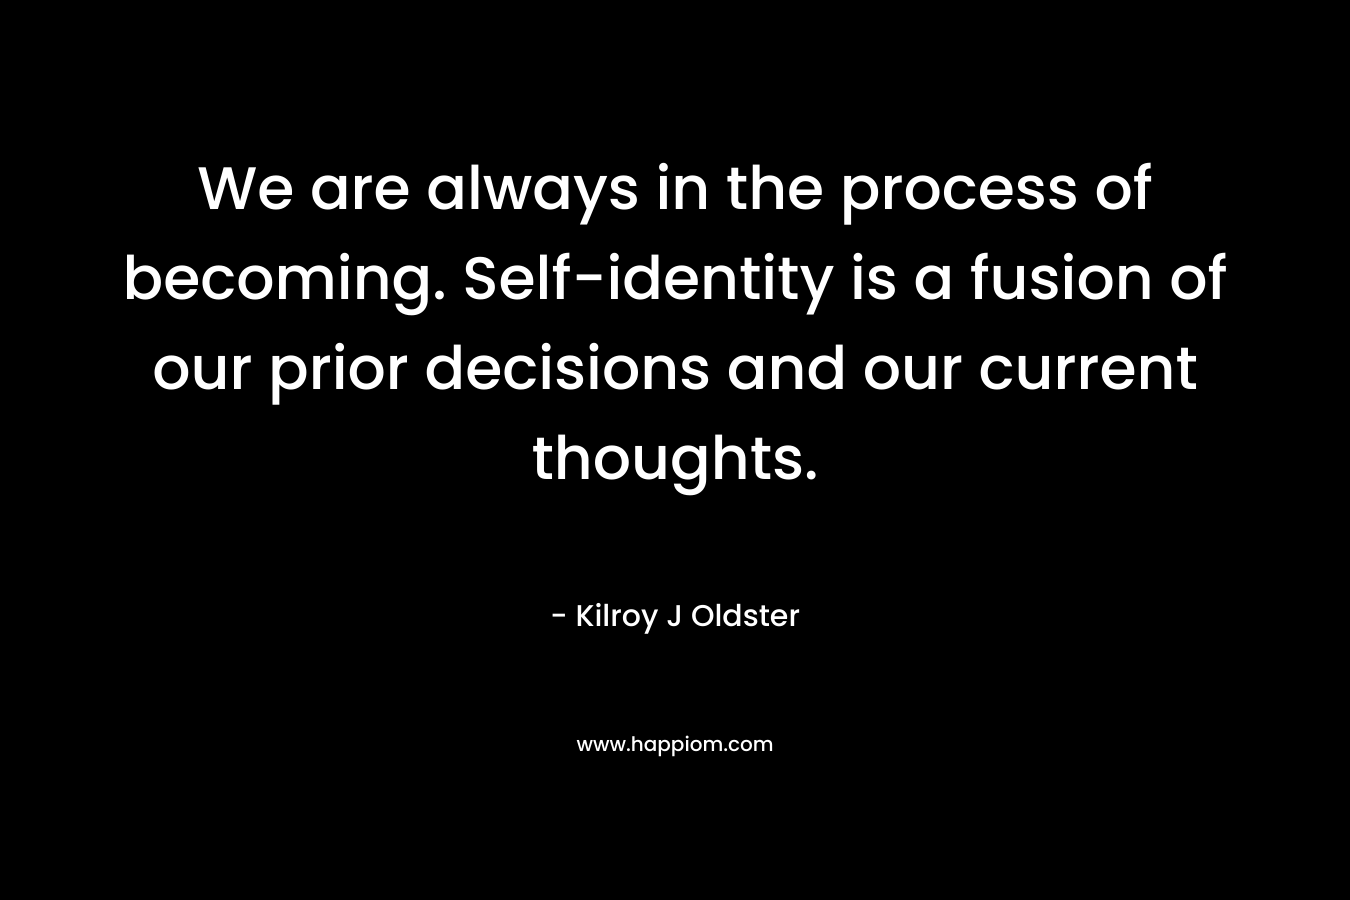 We are always in the process of becoming. Self-identity is a fusion of our prior decisions and our current thoughts. – Kilroy J Oldster